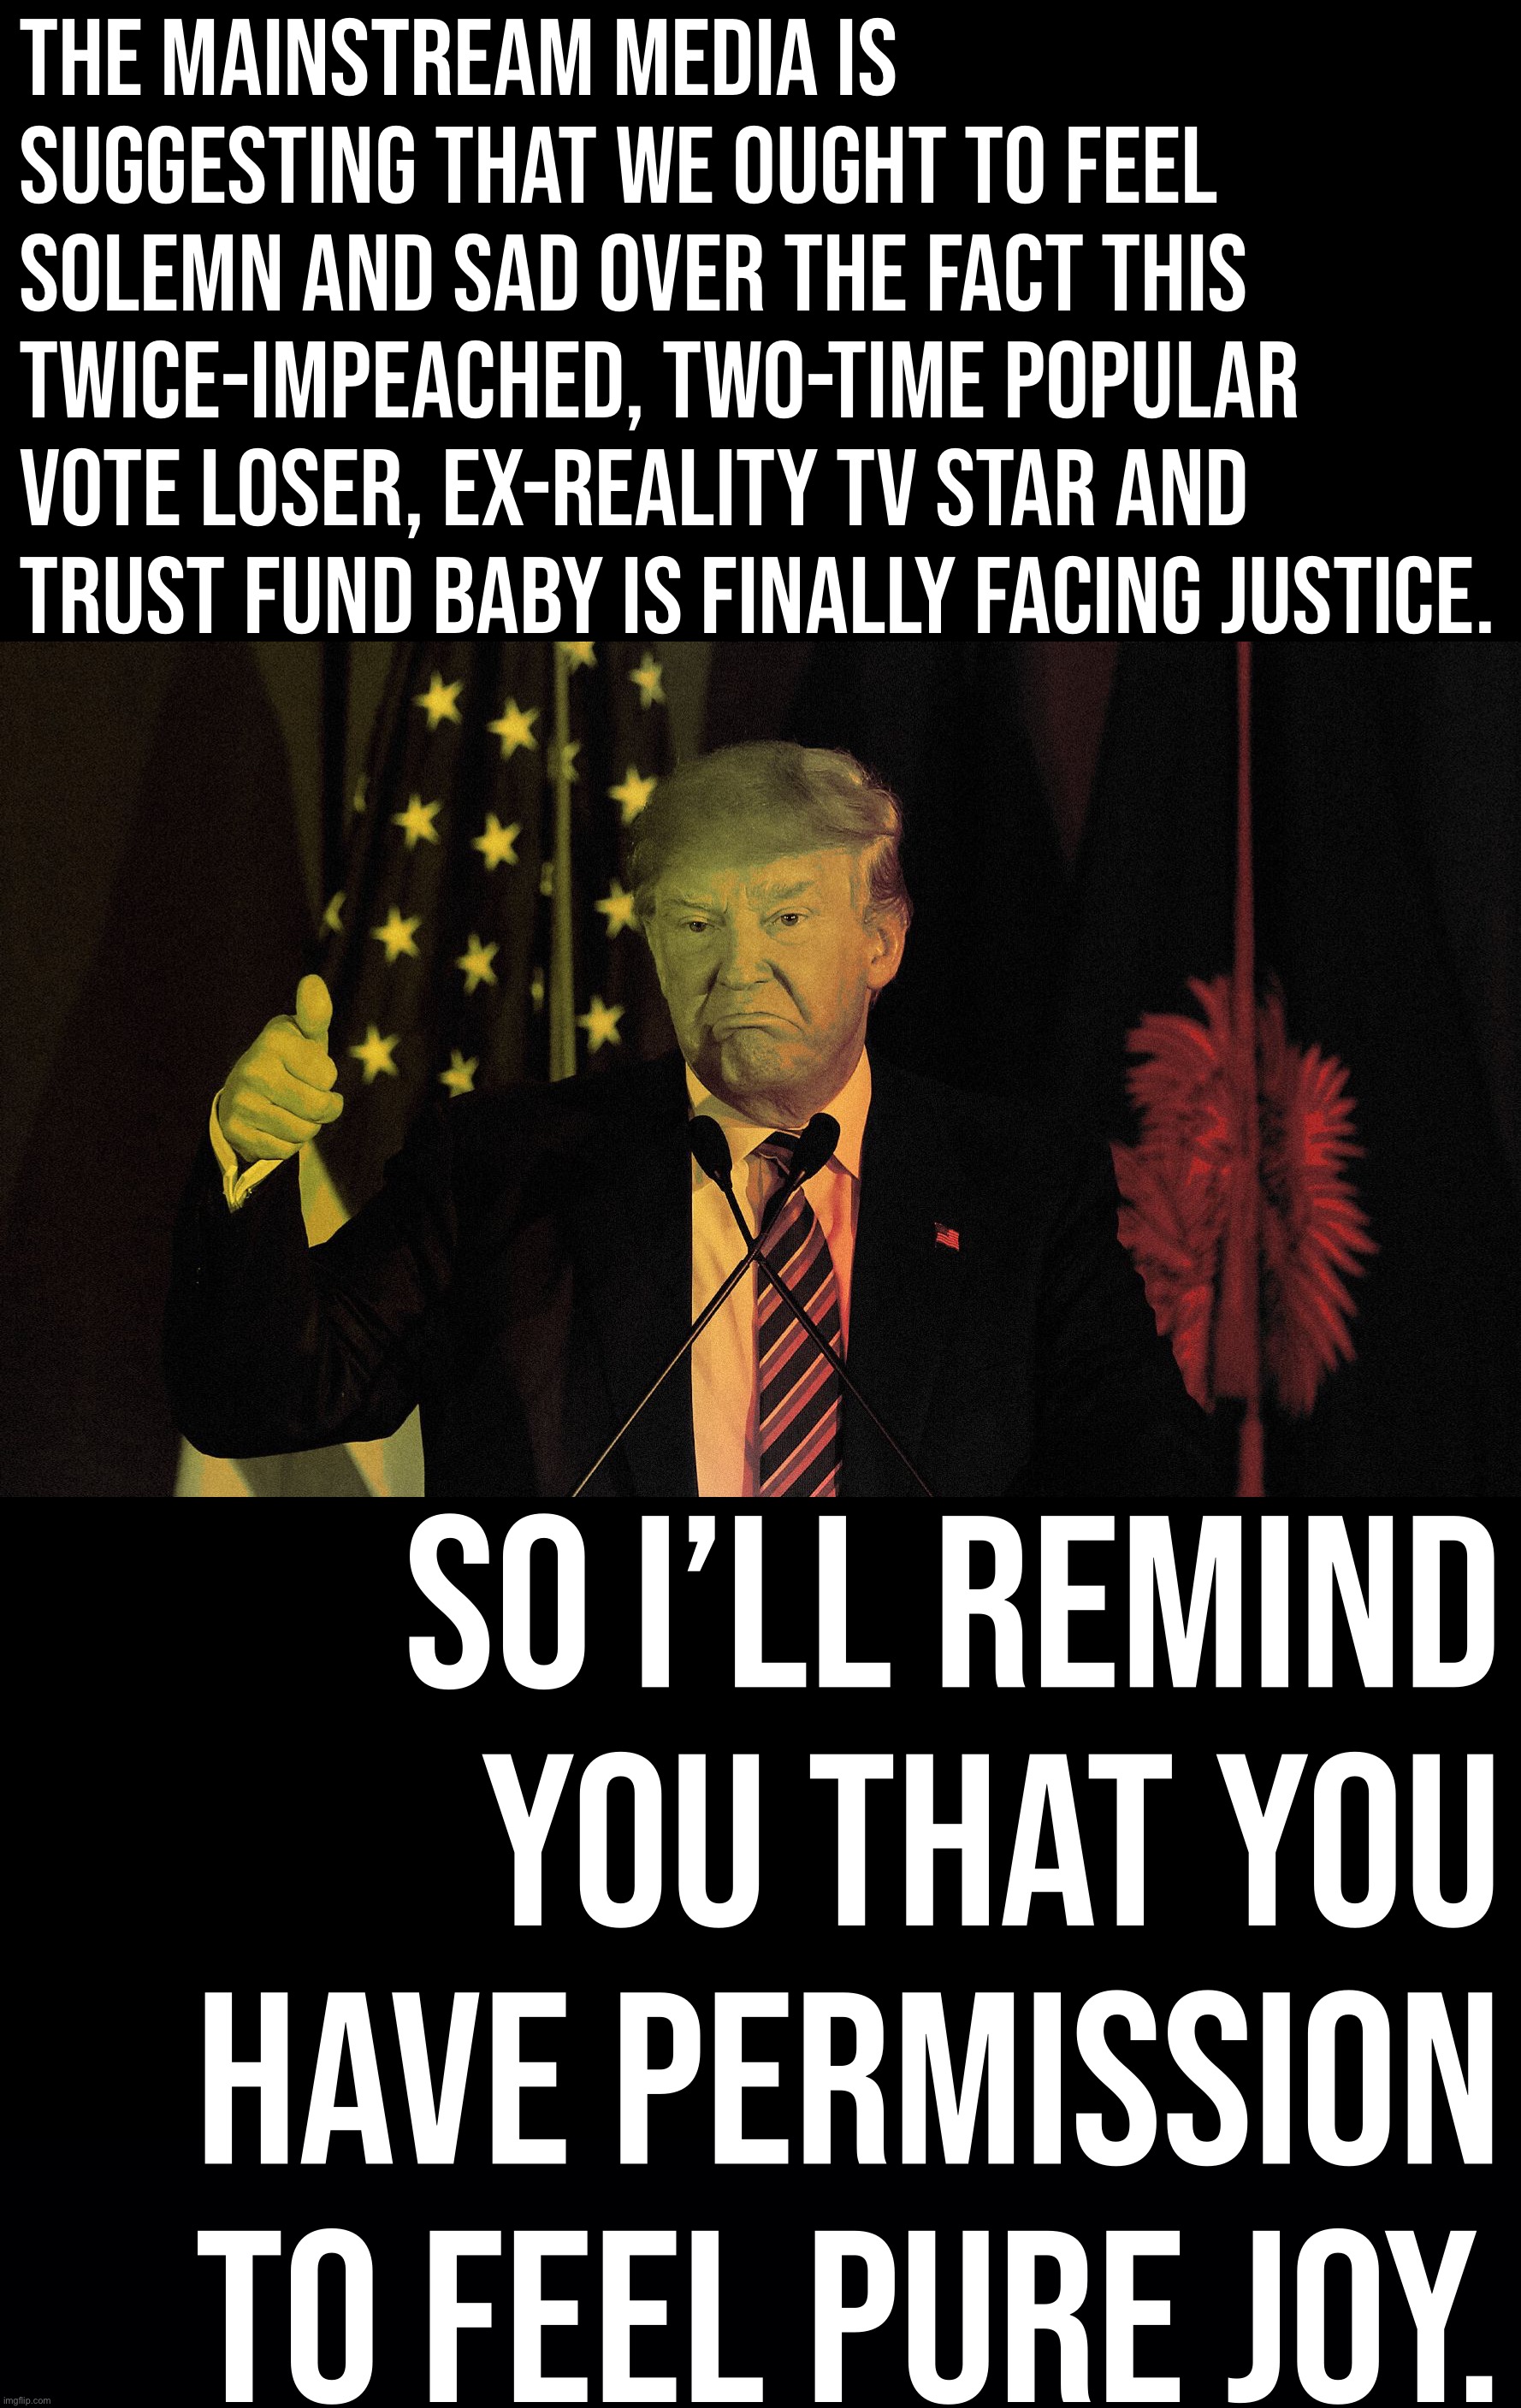 THE MAINSTREAM MEDIA IS SUGGESTING THAT WE OUGHT TO FEEL SOLEMN AND SAD OVER THE FACT THIS TWICE-IMPEACHED, TWO-TIME POPULAR VOTE LOSER, EX-REALITY TV STAR AND TRUST FUND BABY IS FINALLY FACING JUSTICE. SO I’LL REMIND YOU THAT YOU HAVE PERMISSION TO FEEL PURE JOY. | image tagged in evil donald trump thumbs up,black background | made w/ Imgflip meme maker